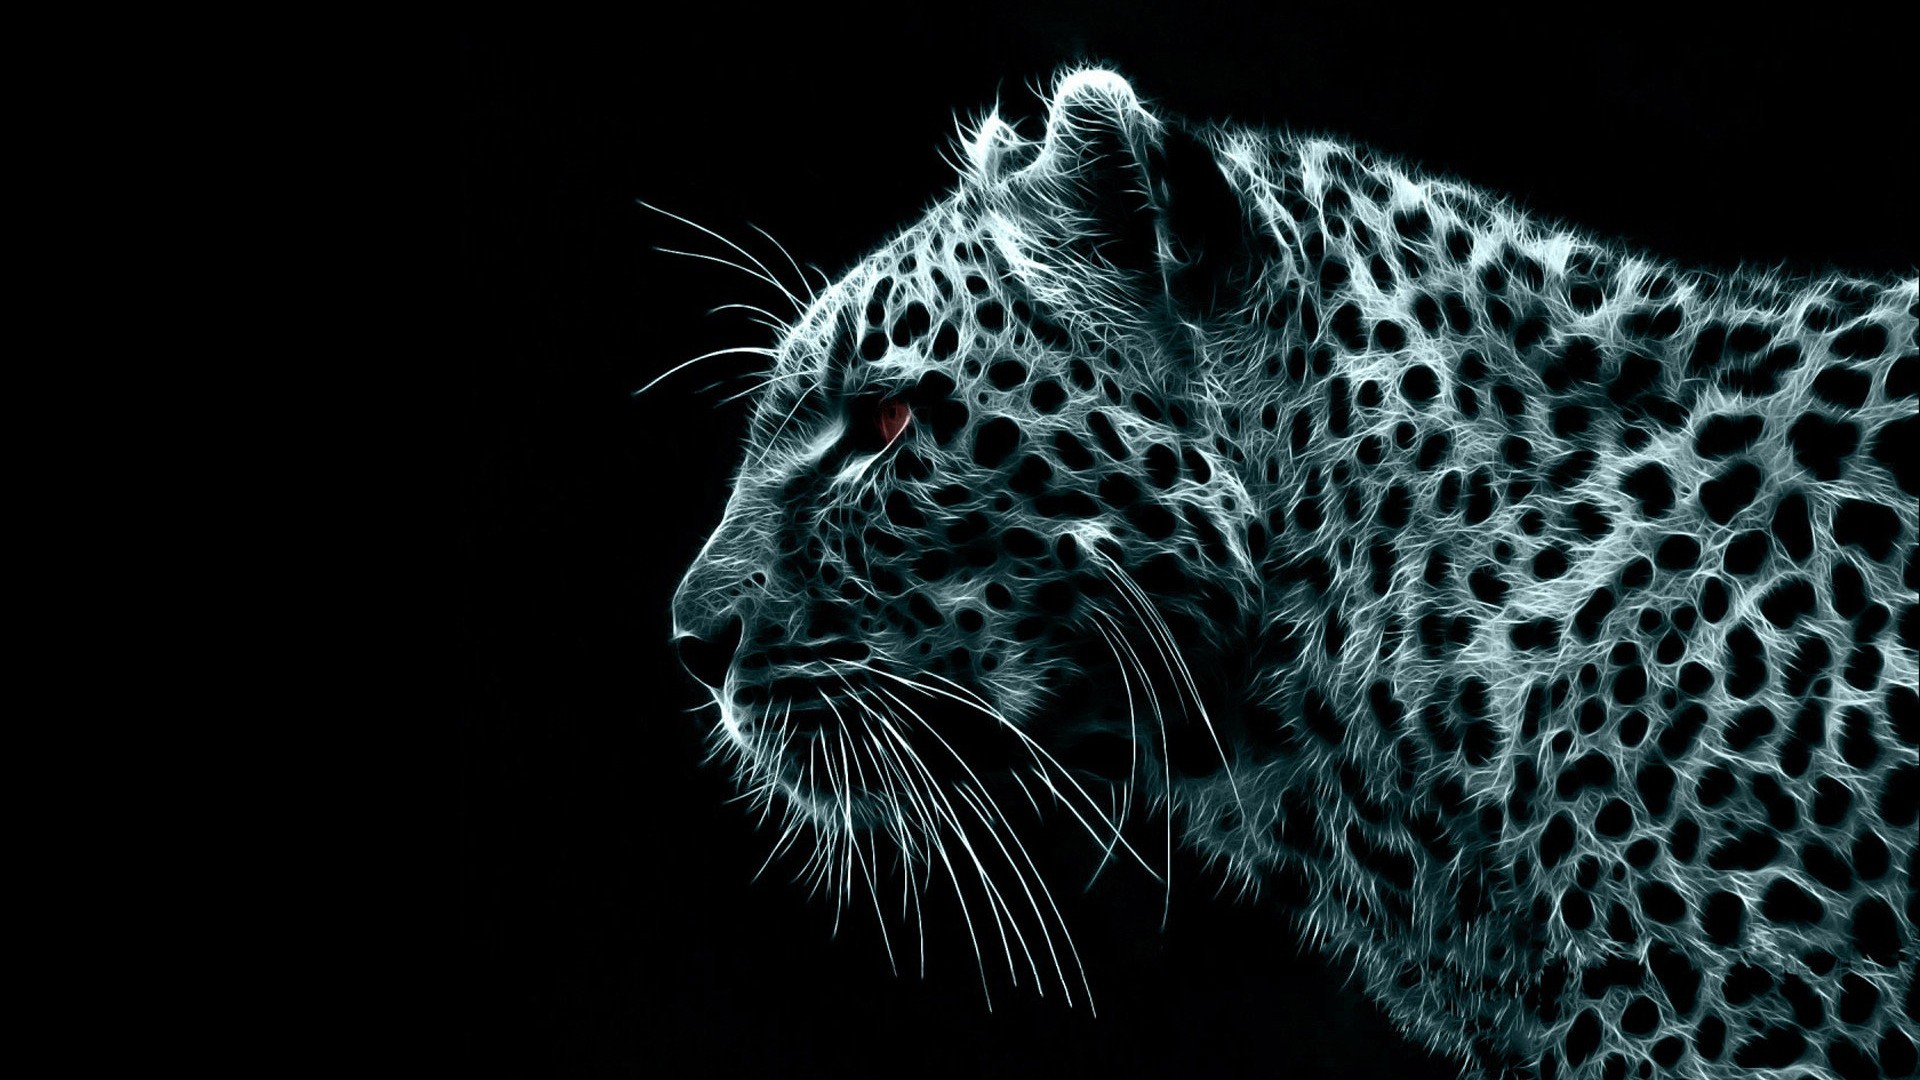 Wallpaper Leopard Desktop And Make This For Your